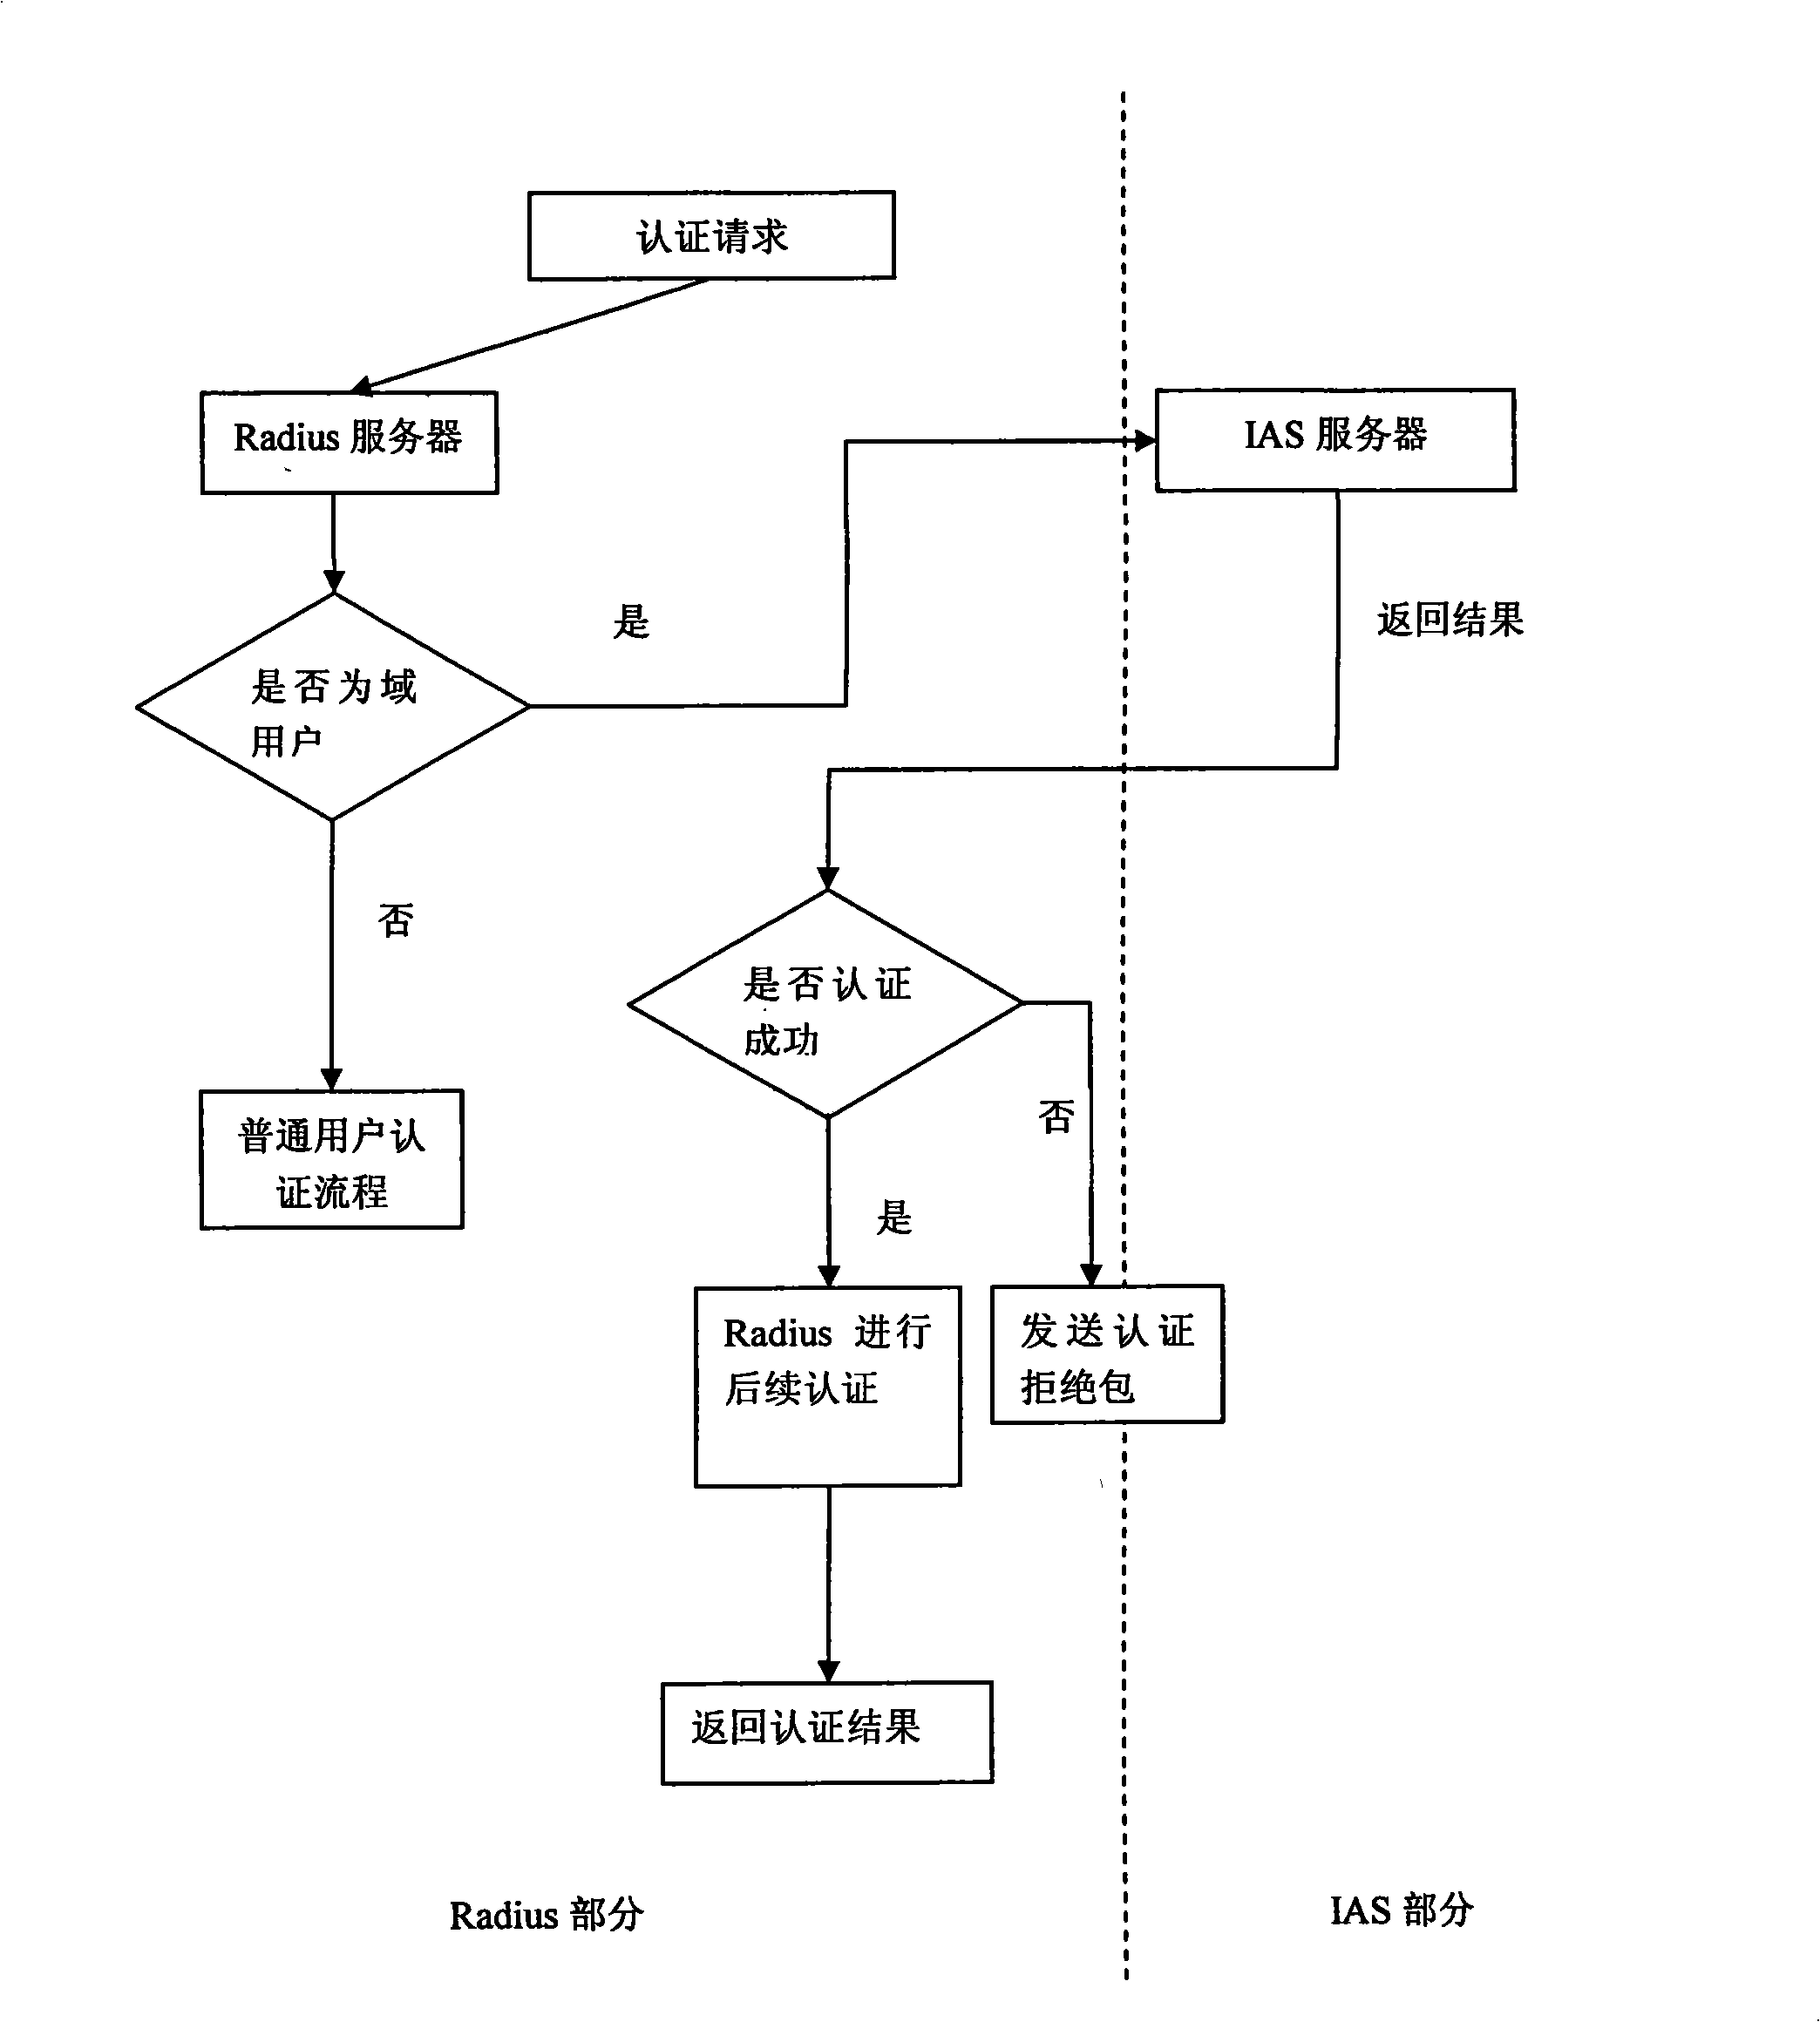 Method for implementing IAS system and Radius system integration